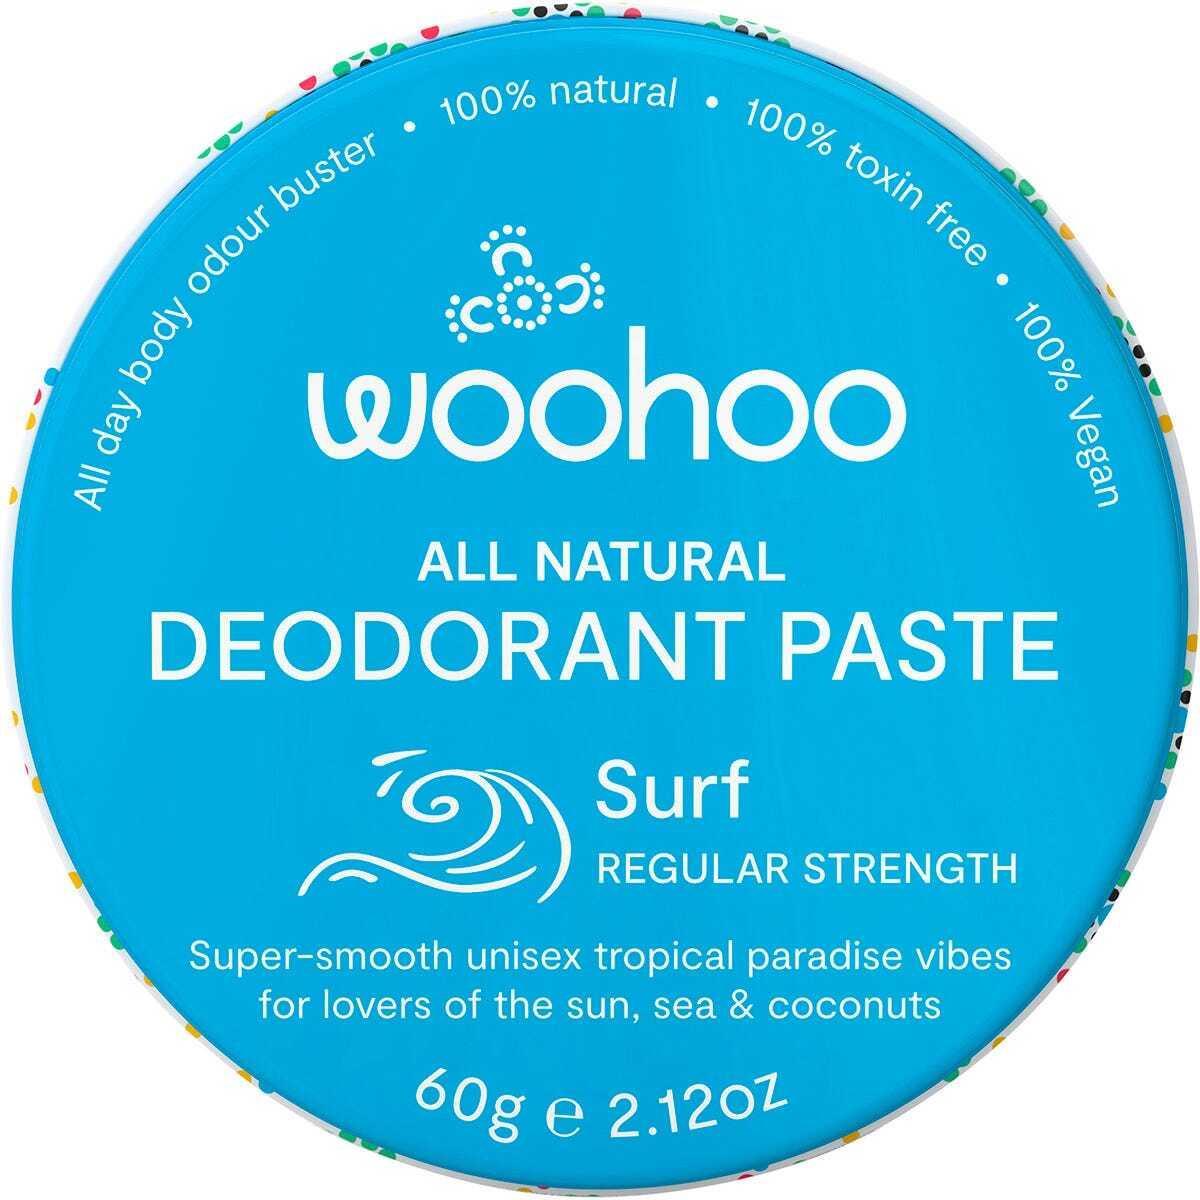 All Natural Deodorant Paste - Surf 60g